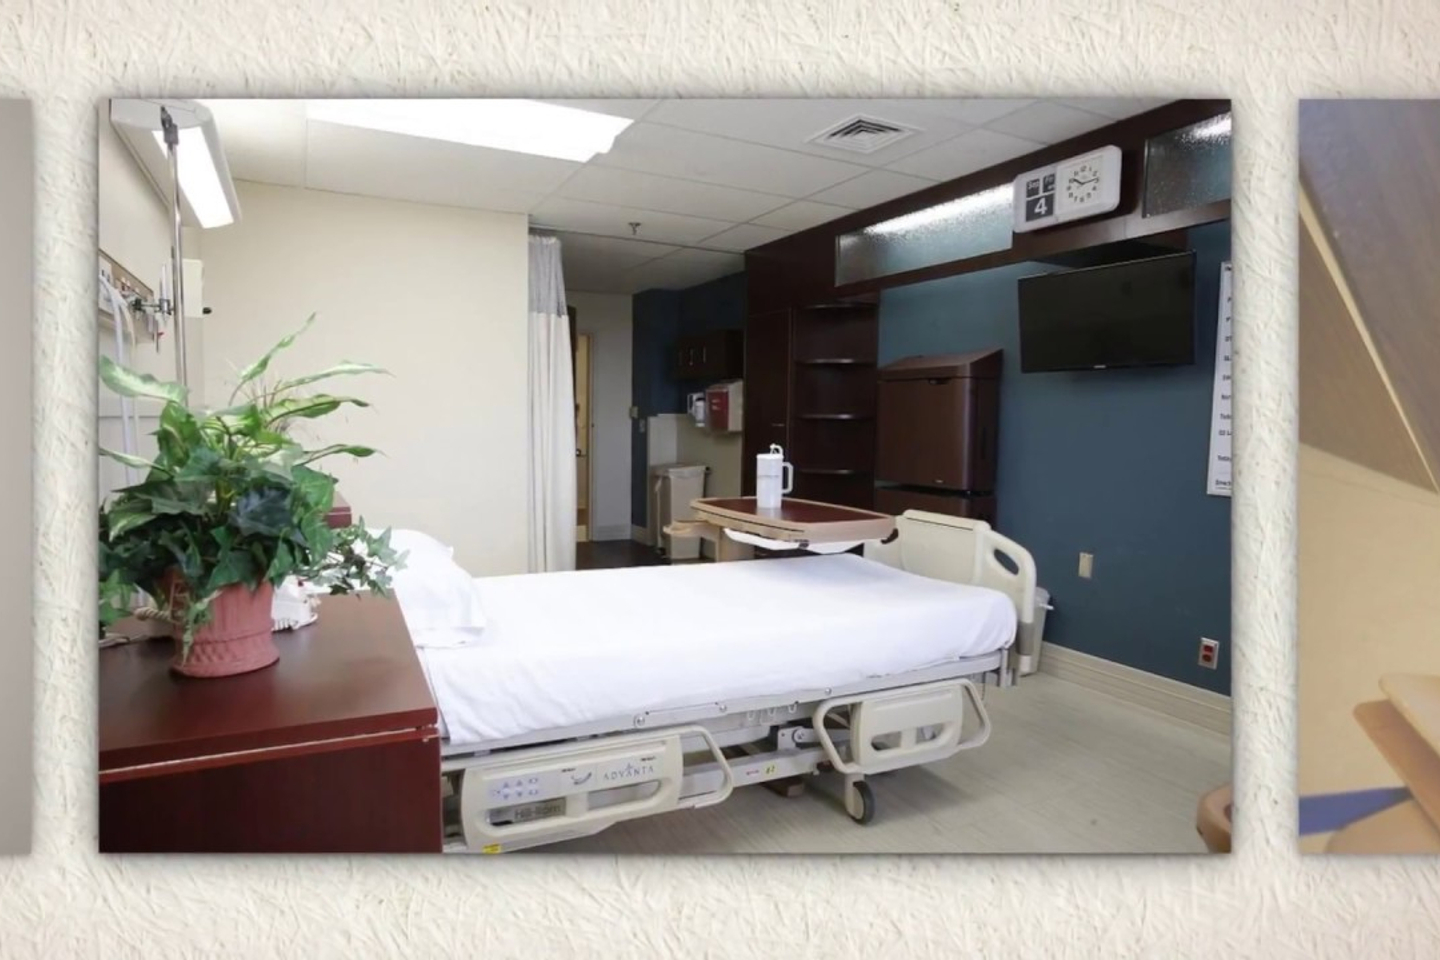 The interior of a the inpatient rehab hospital room with a bed, dressers, television and house plant on the dresser next to the bed.